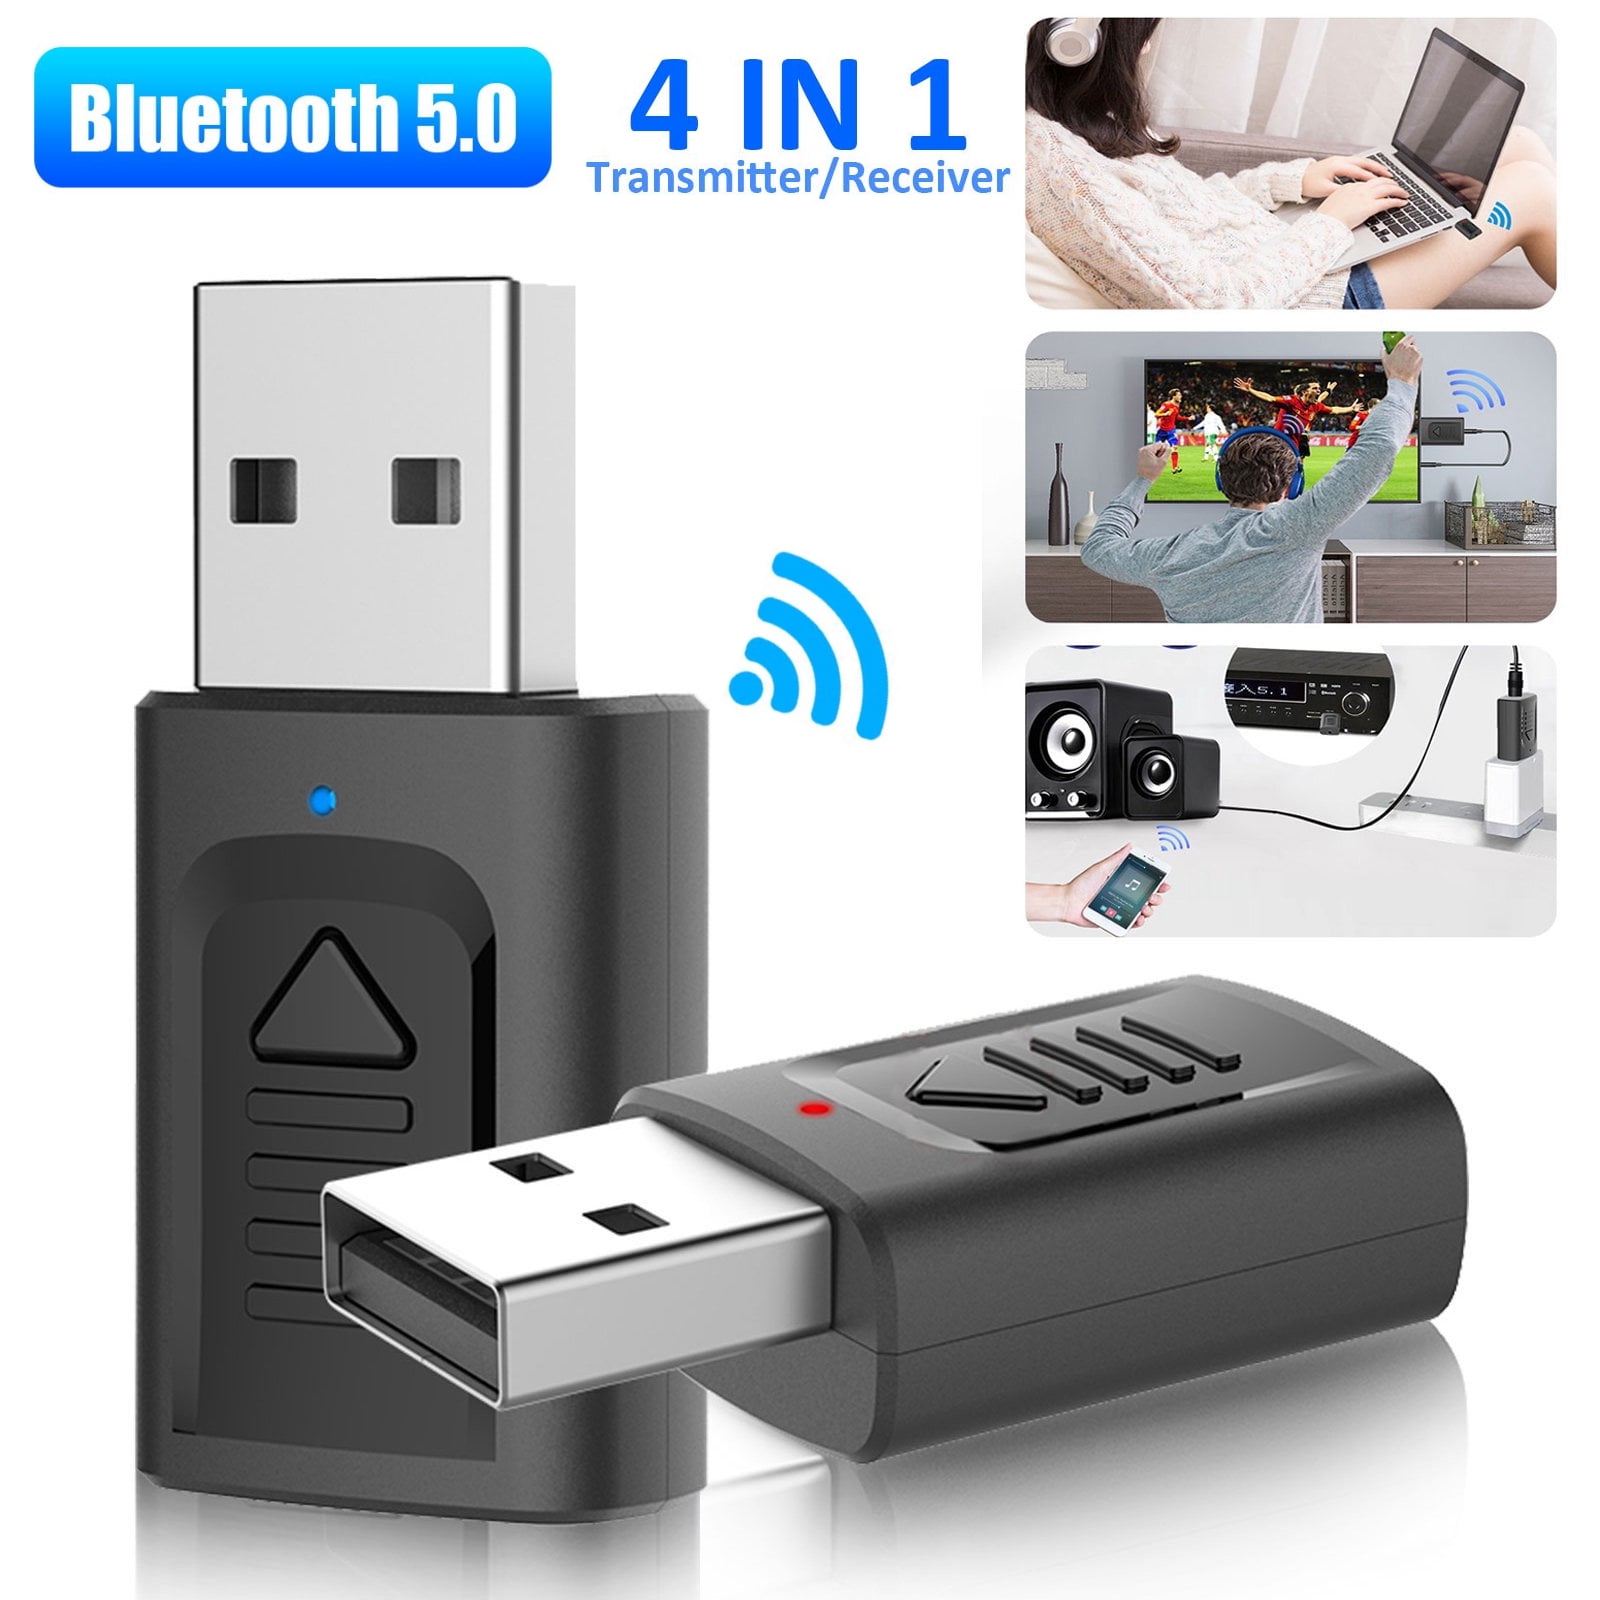 Dongle USB Receiver Digital Devices Bluetooth 5.0 Adapter Music Audio Receiver 